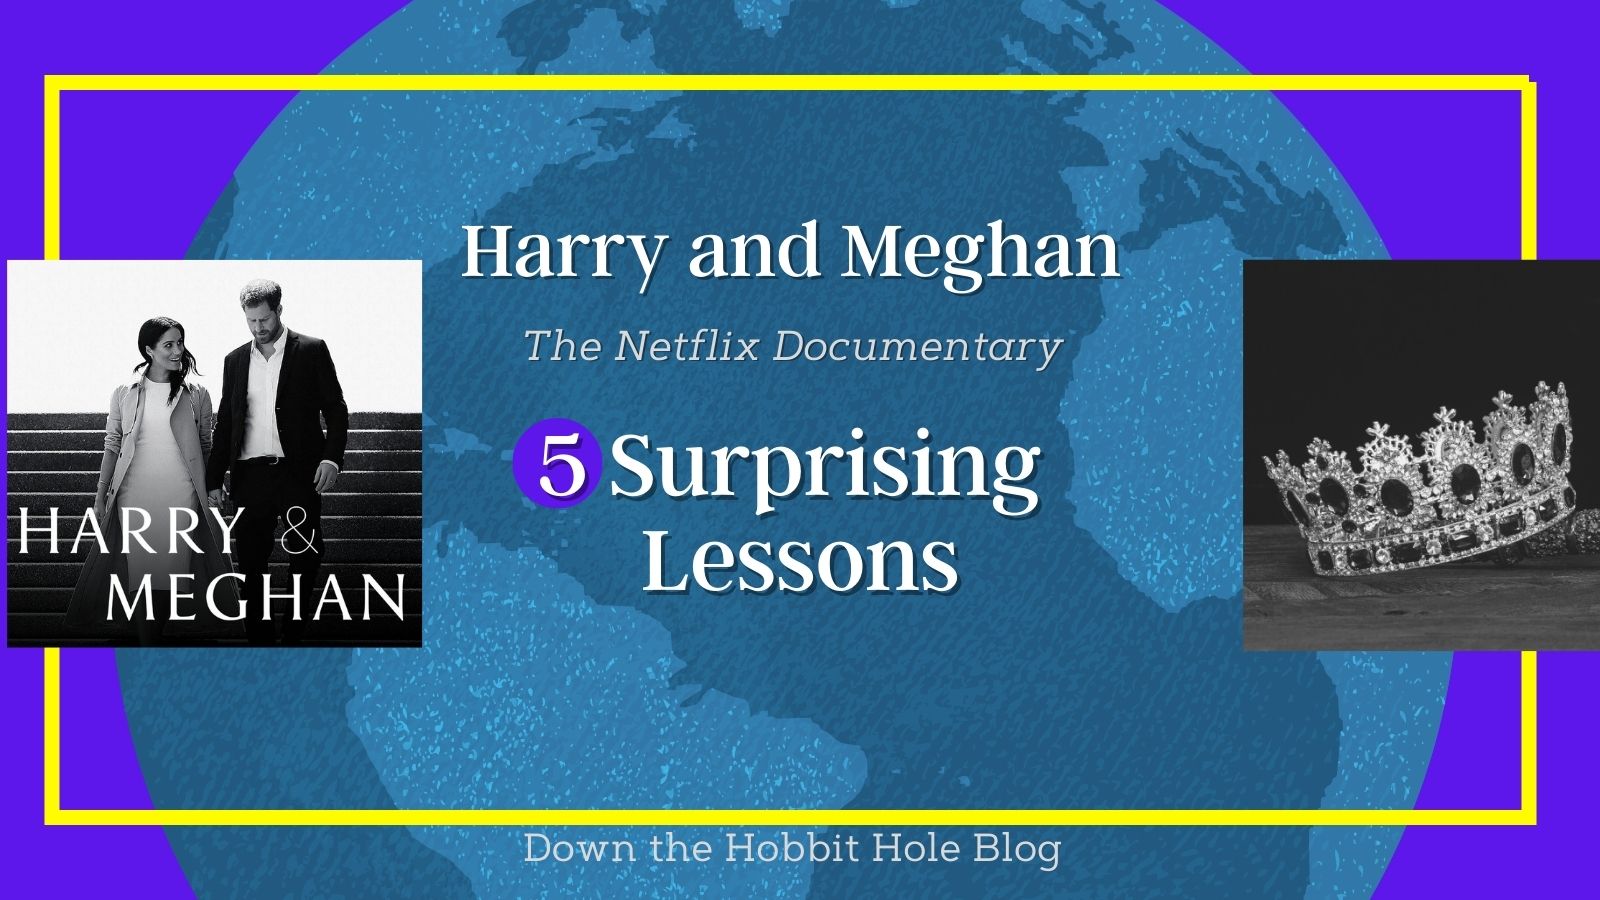 Harry and Meghan Documentary Lessons and Discussion main title image on a blue background